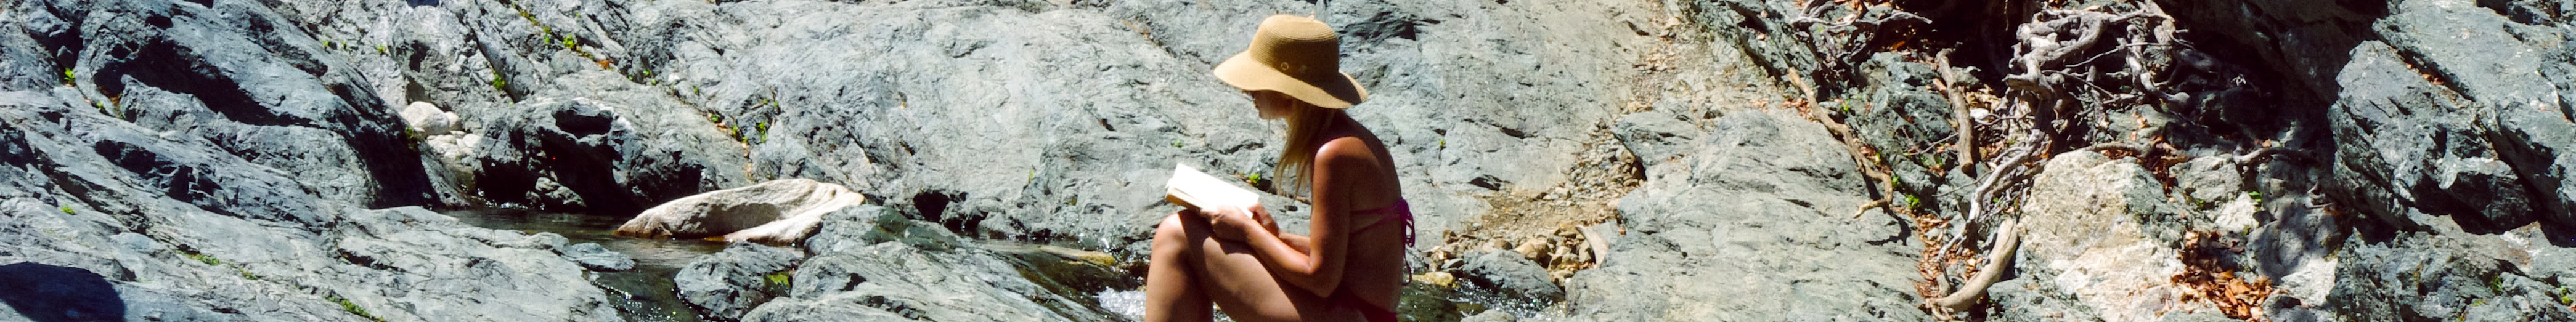 A woman reading a book on a nature rock